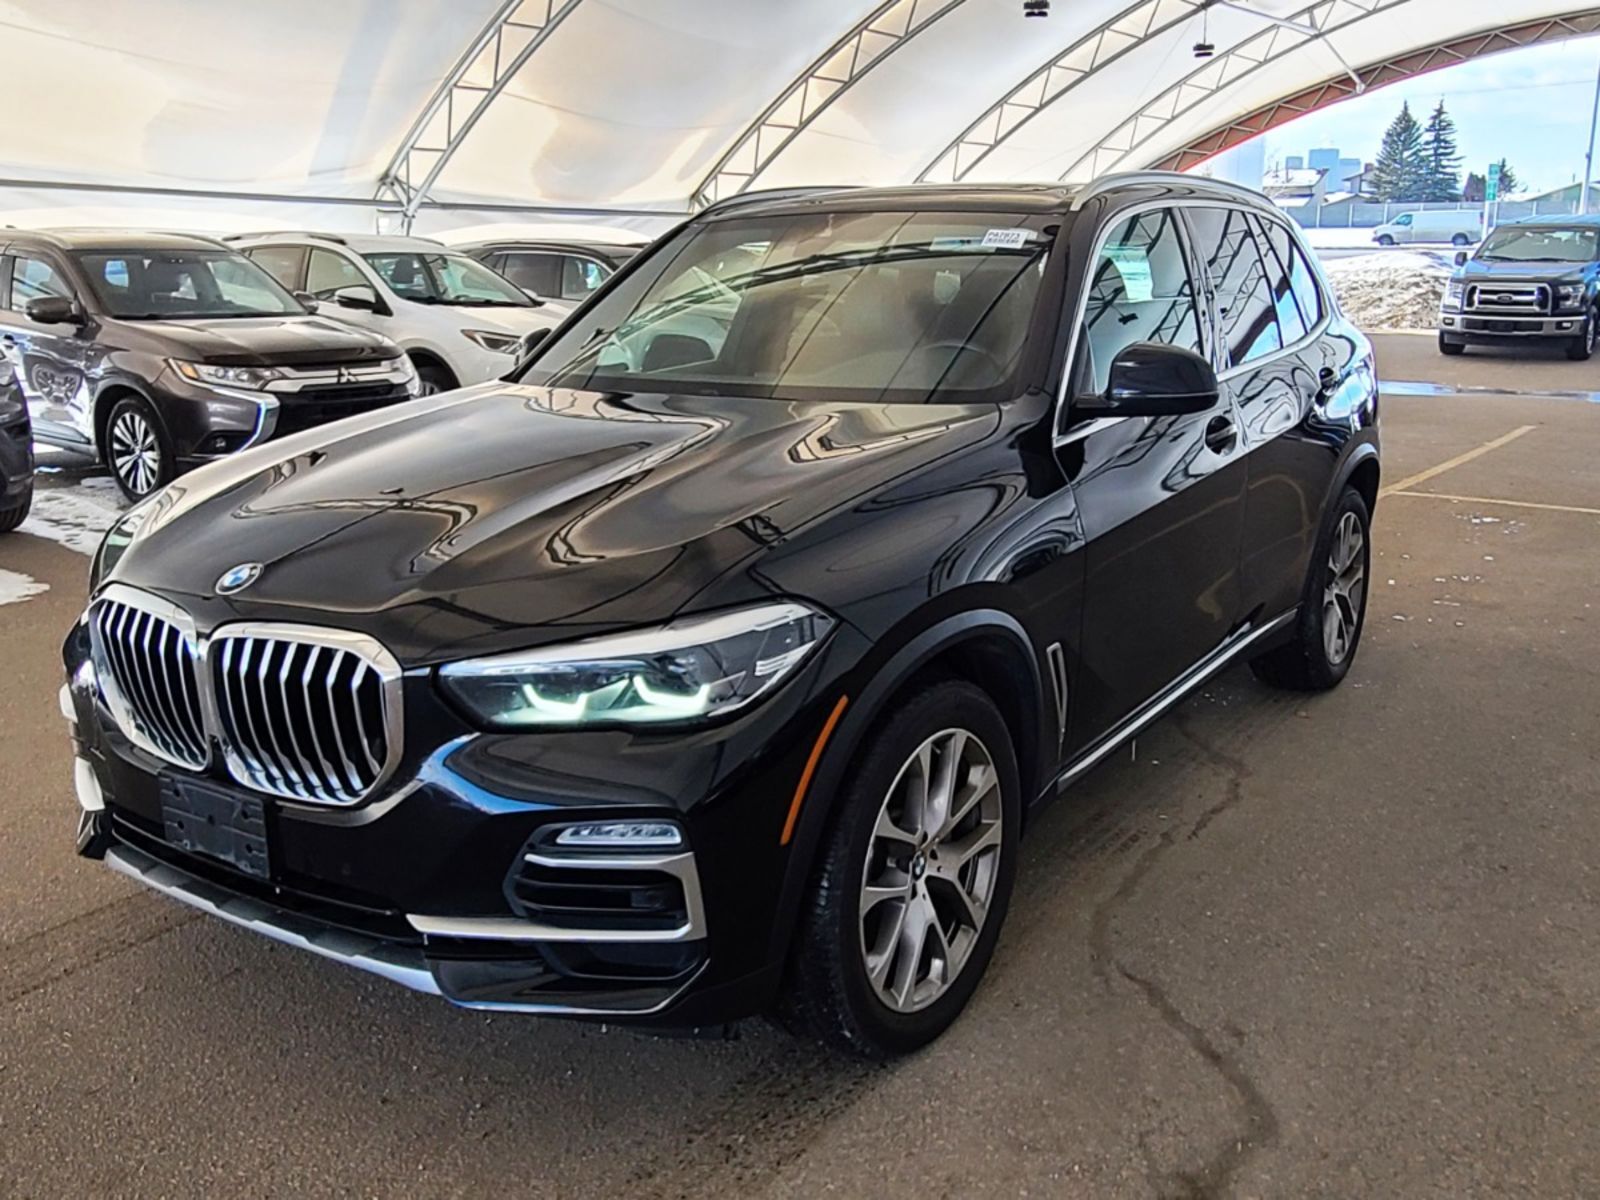 2021 BMW X5 Ultimate Driving Machine - Pano Roof | Heated Stee